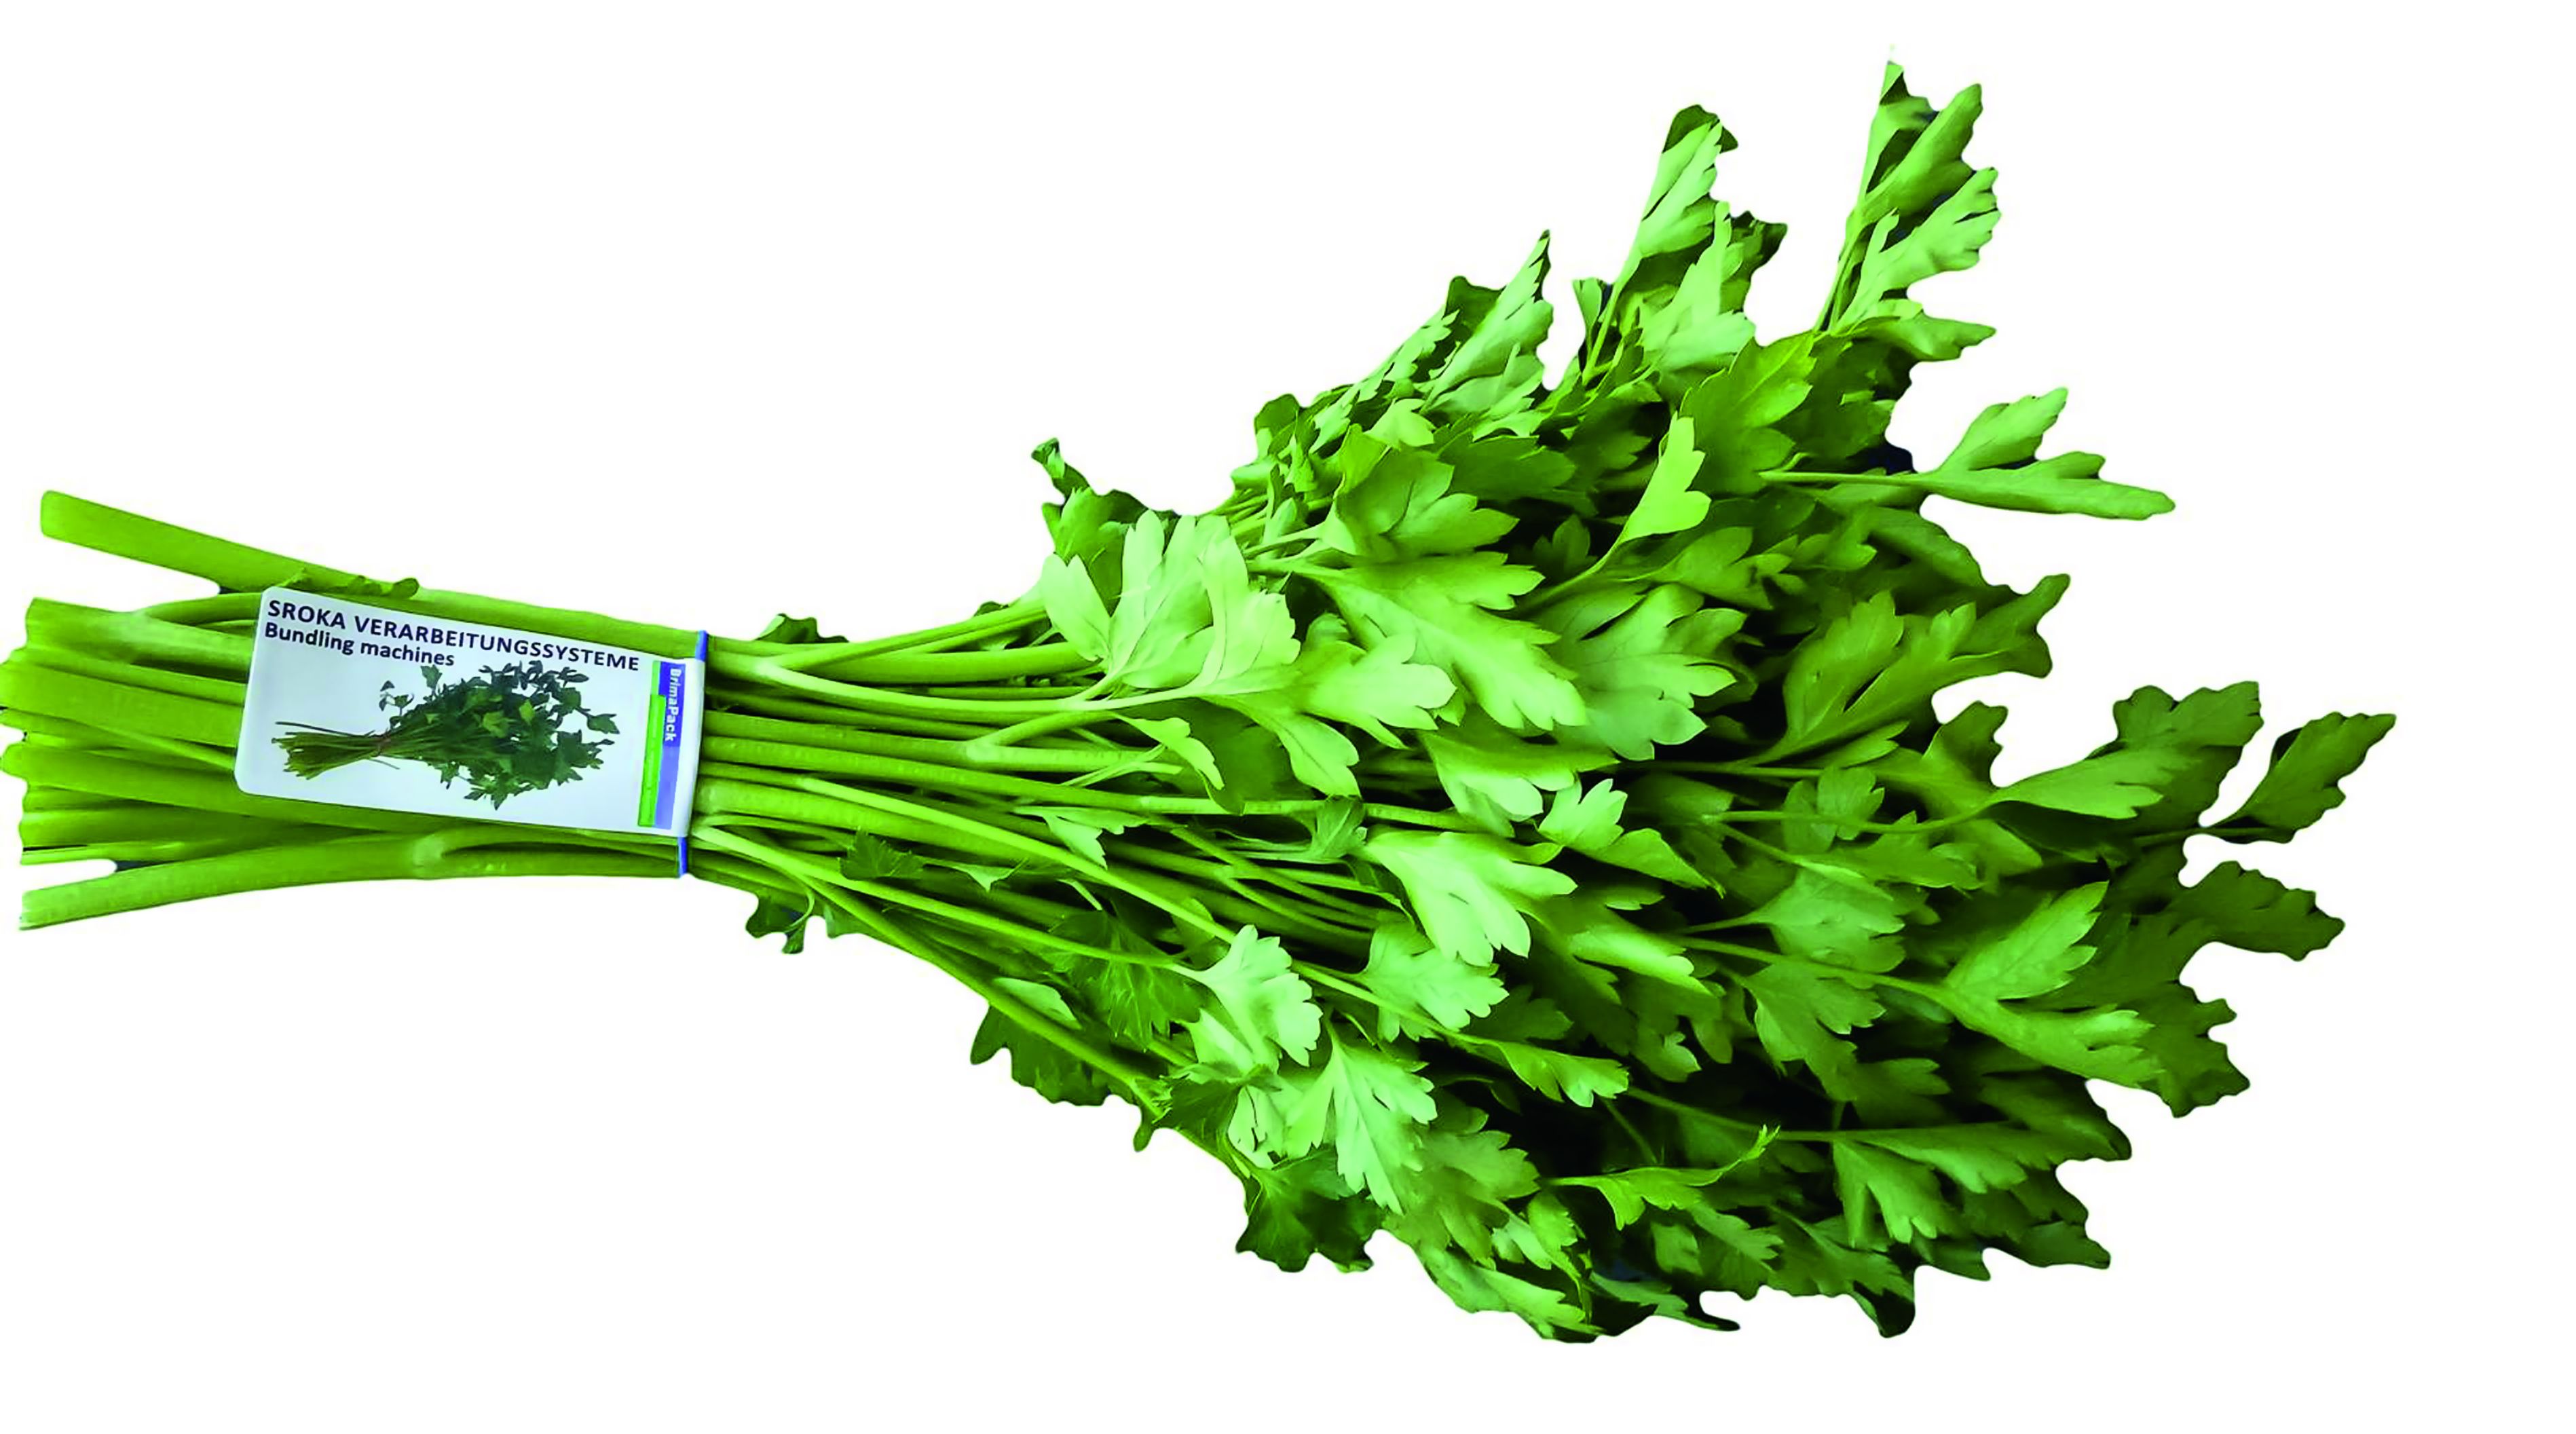 Bundling and labeling of parsley